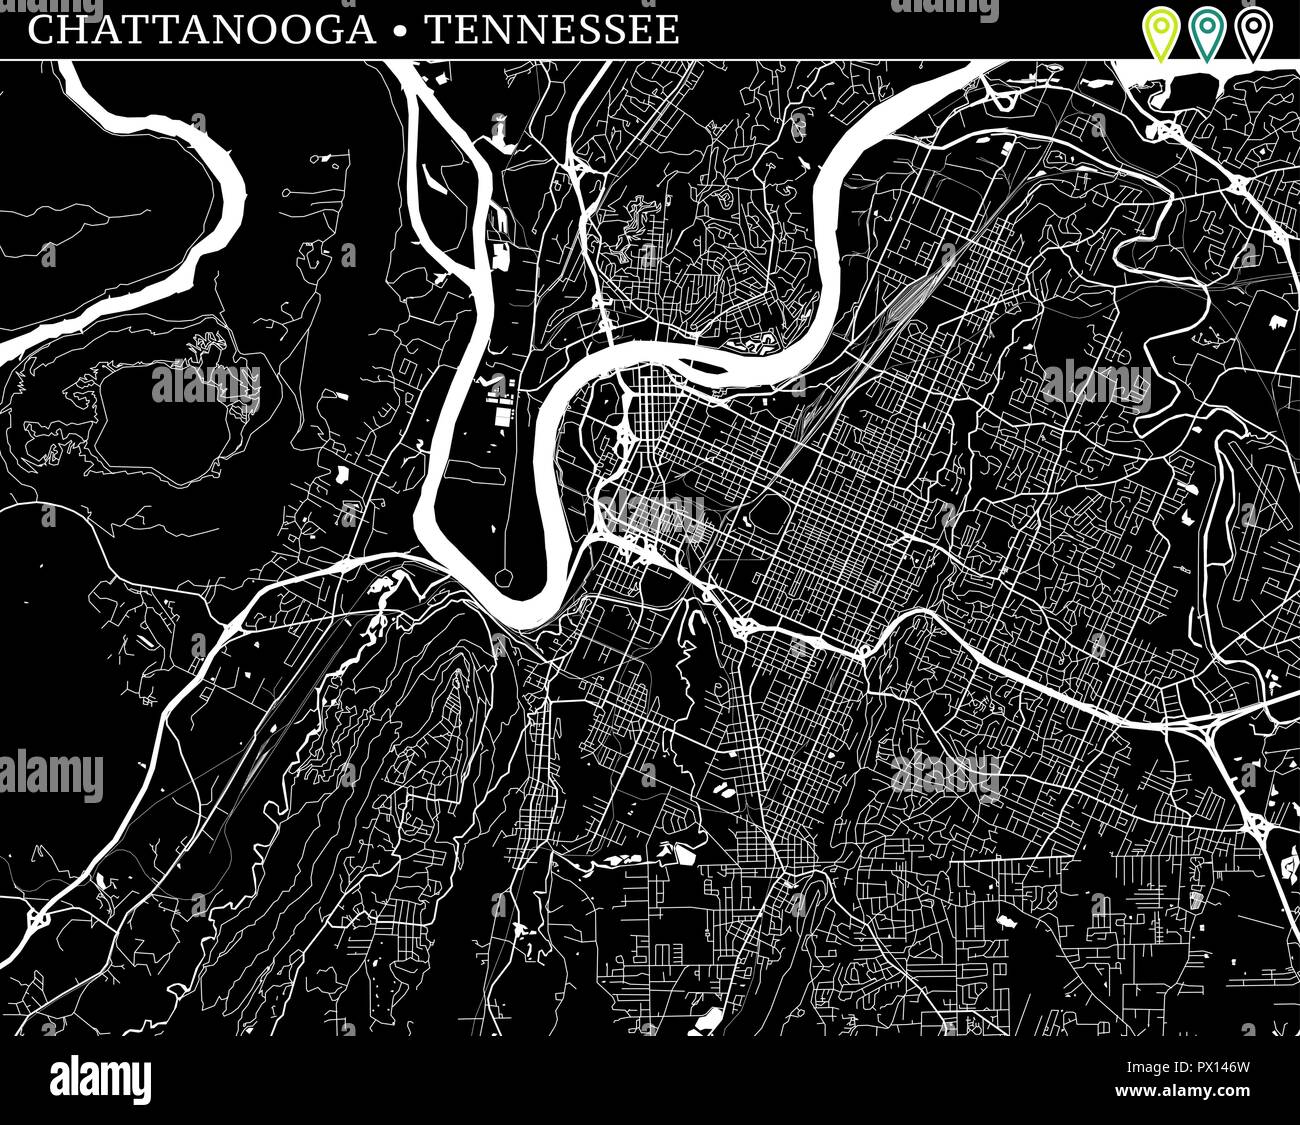 Y chattanooga